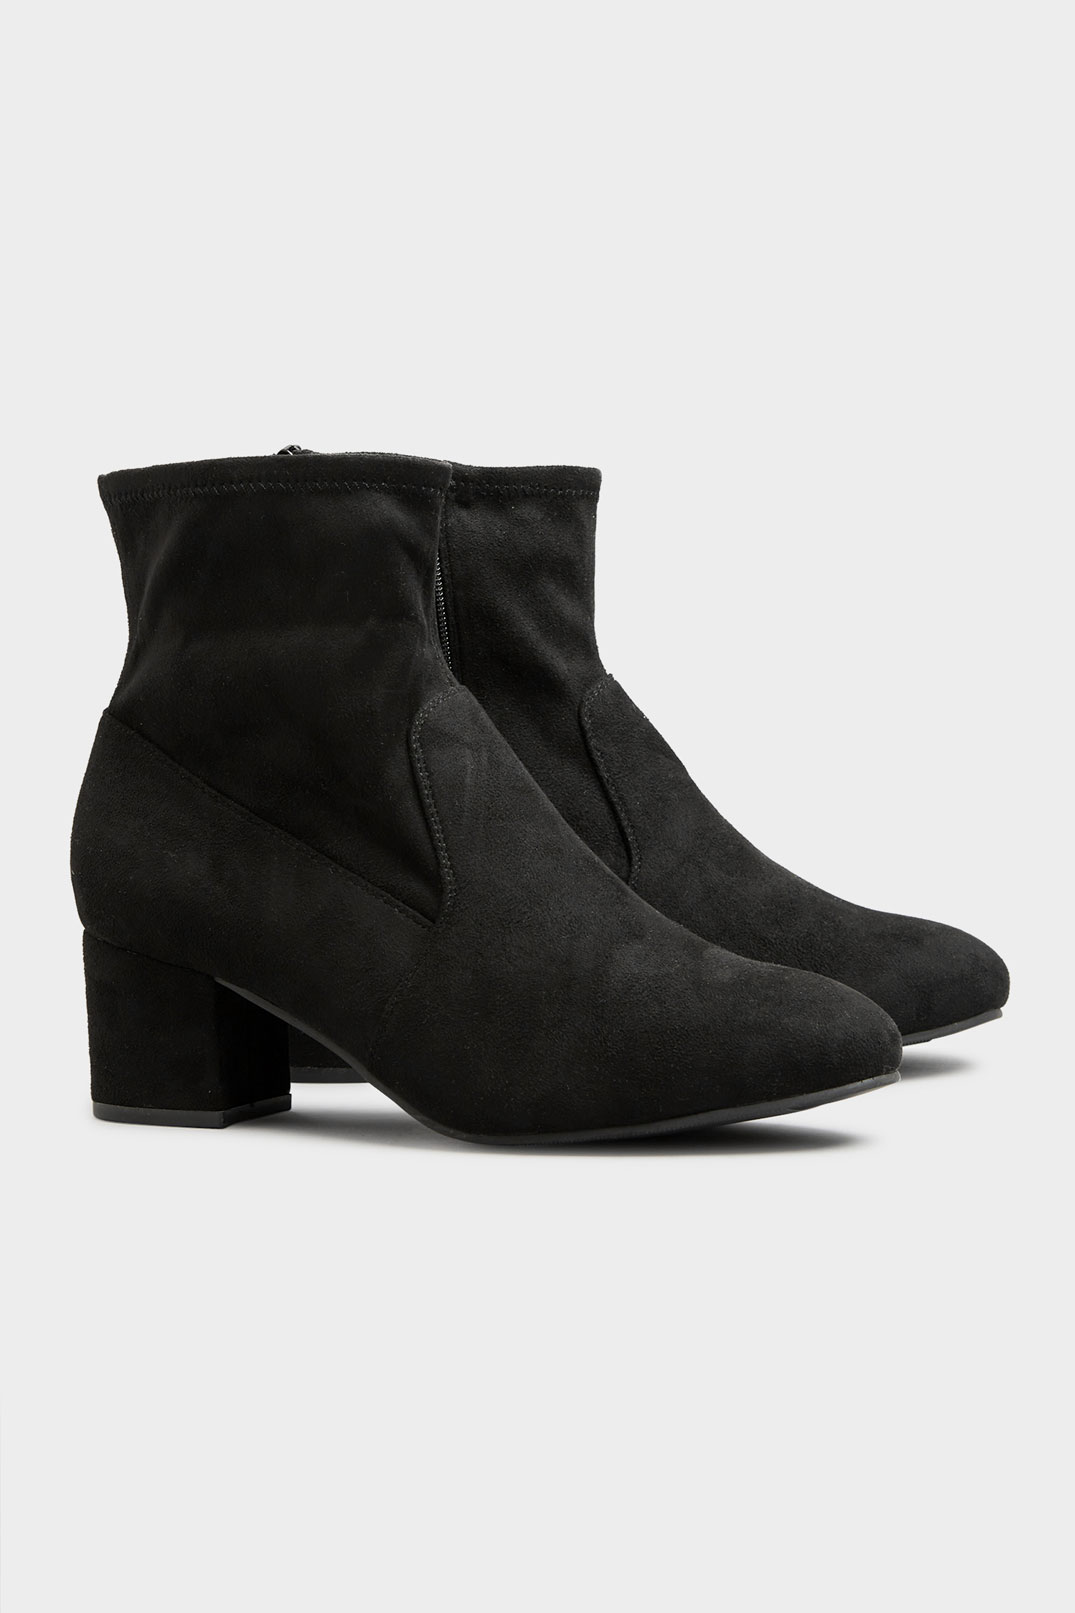 Black Faux Suede Stretch Block Heeled Boots In Extra Wide EEE Fit 1